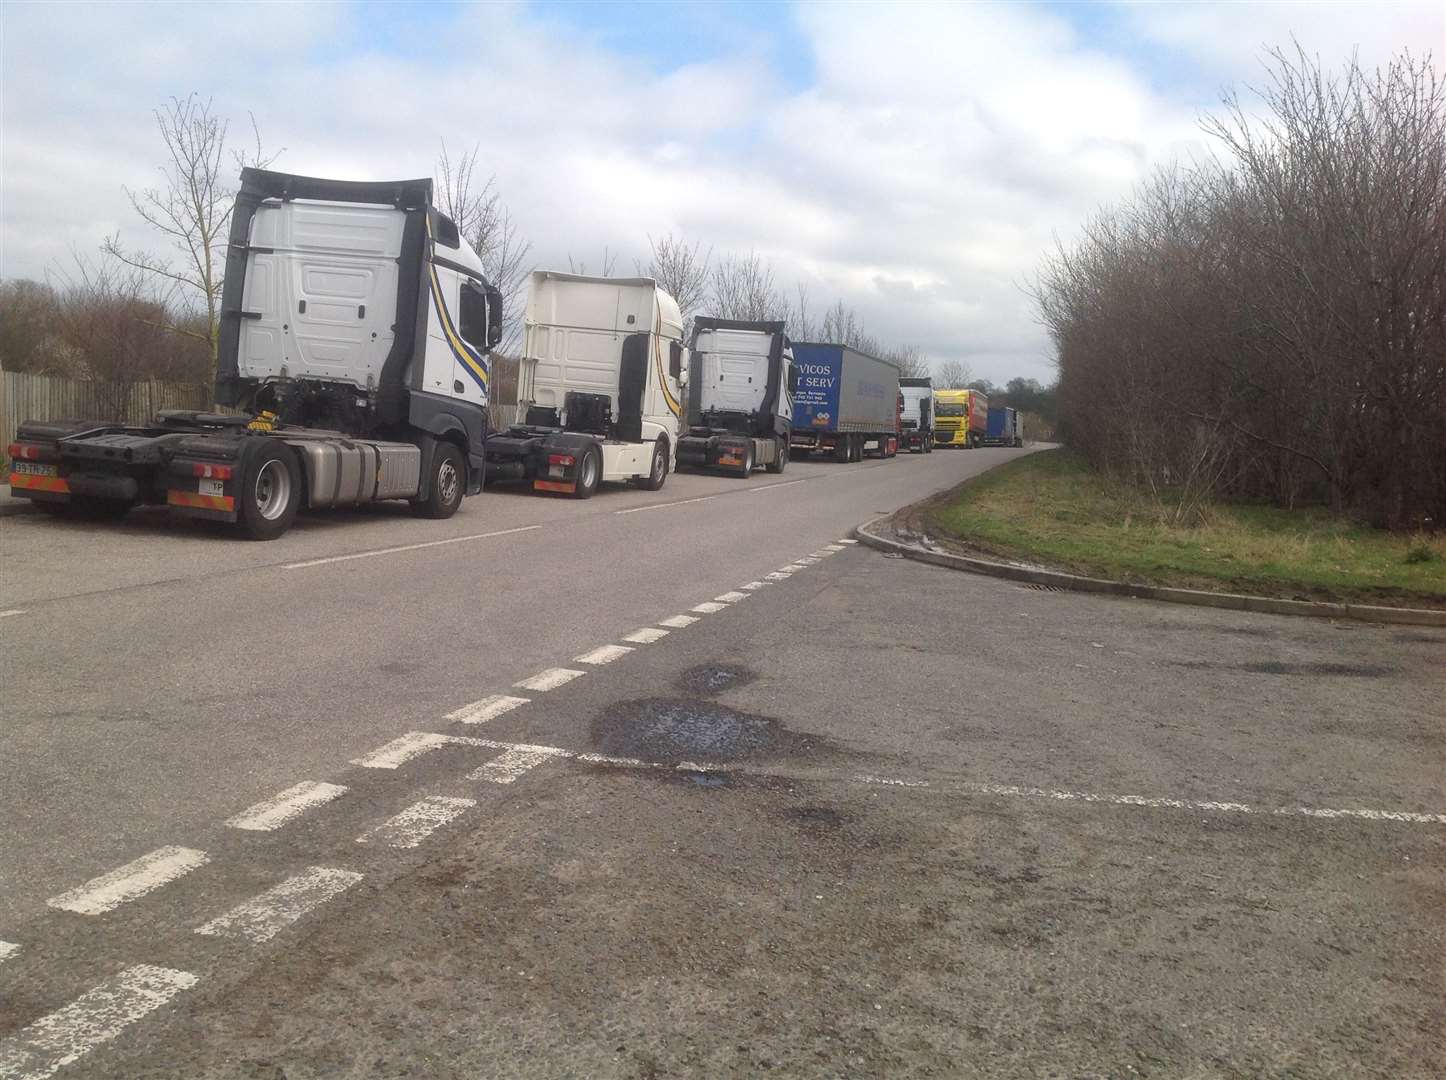 Illegally parked lorries are already a problem in Kent, but it's expected to get worse with Brexit